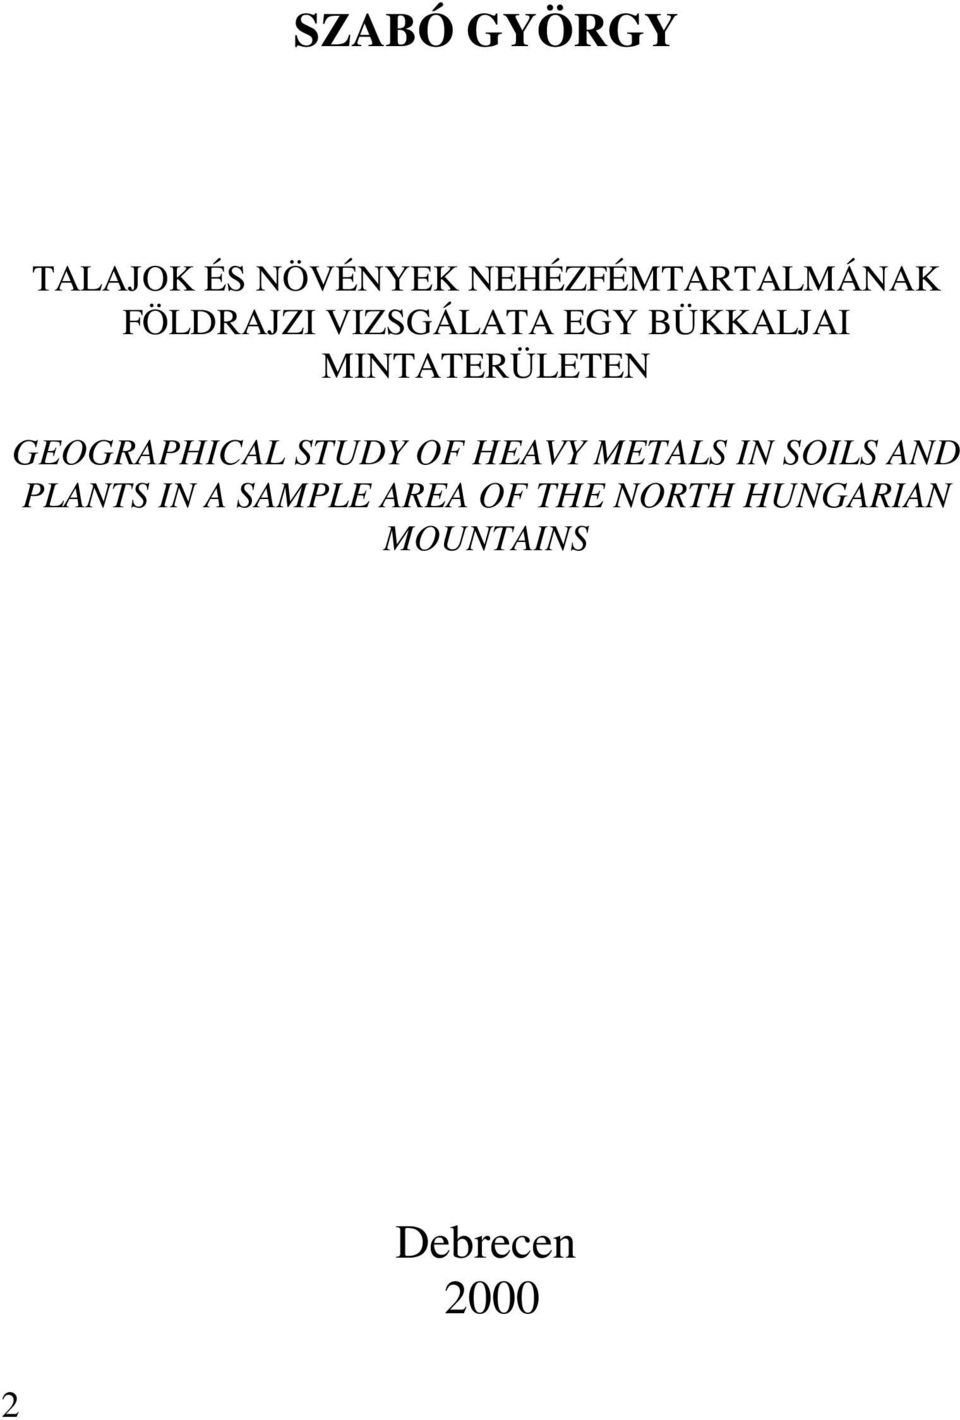 GEOGRAPHICAL STUDY OF HEAVY METALS IN SOILS AND PLANTS